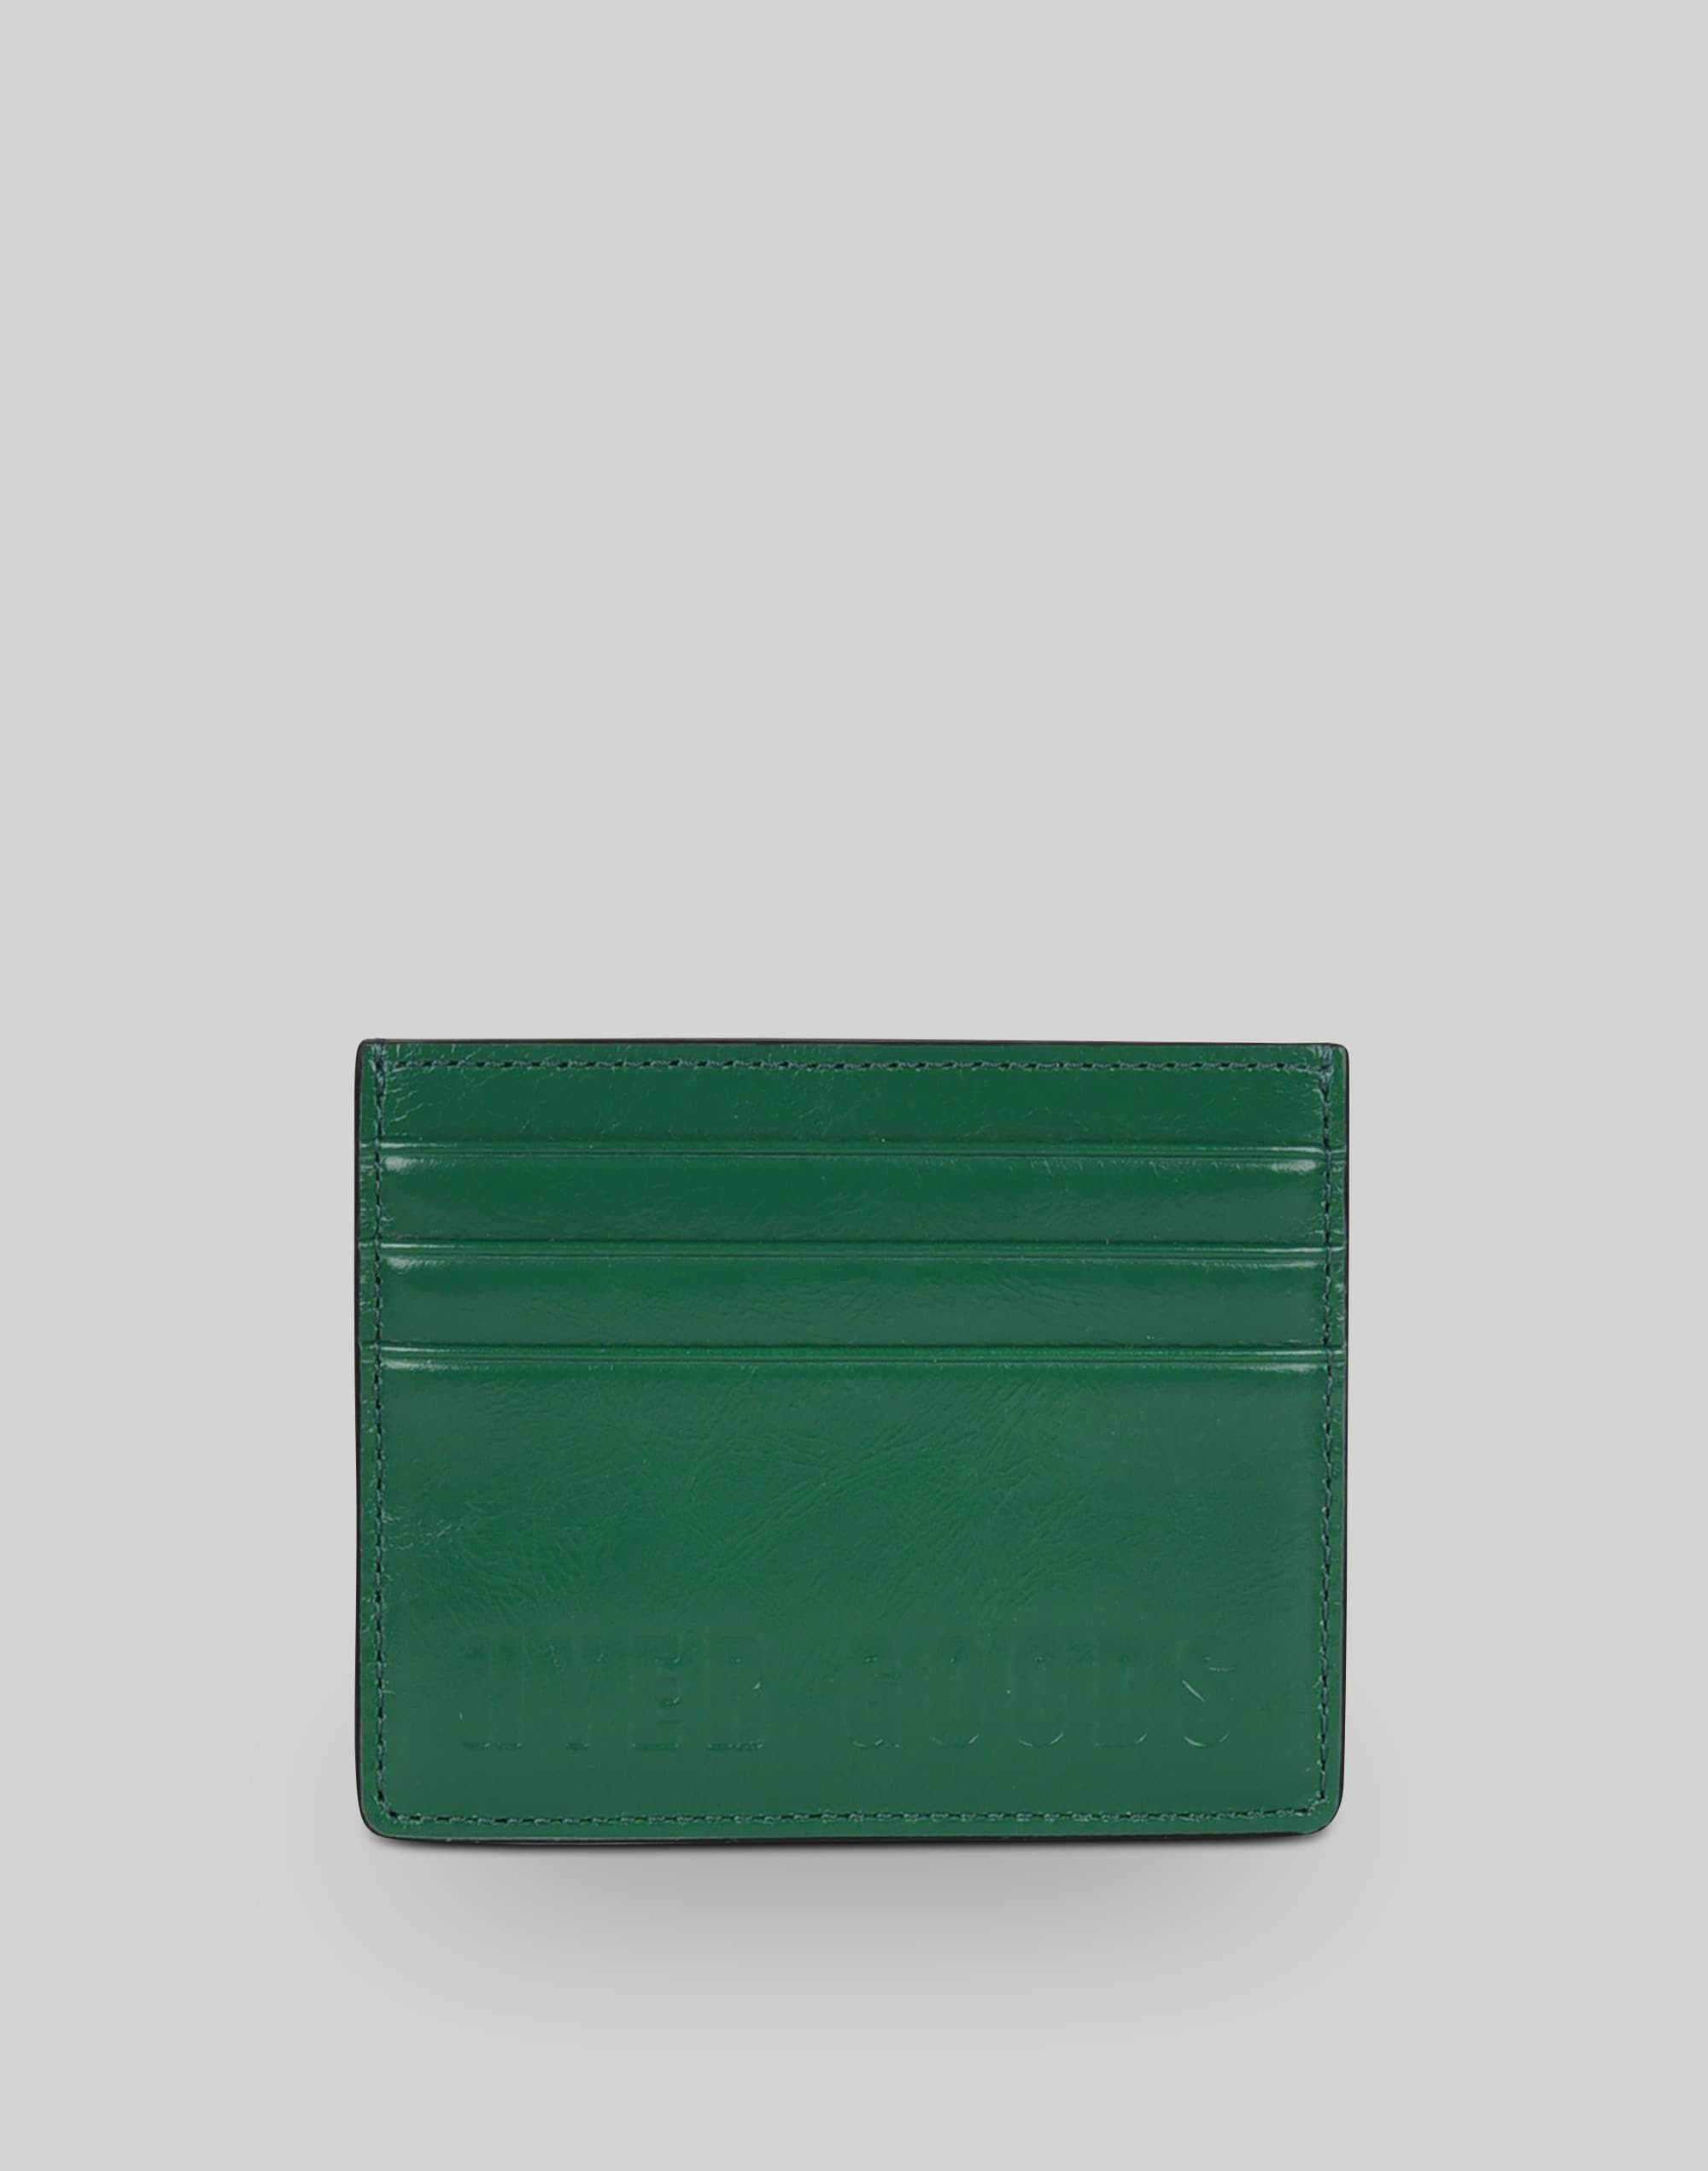 Mw Hyer Goods Luxe Card Wallet In Green